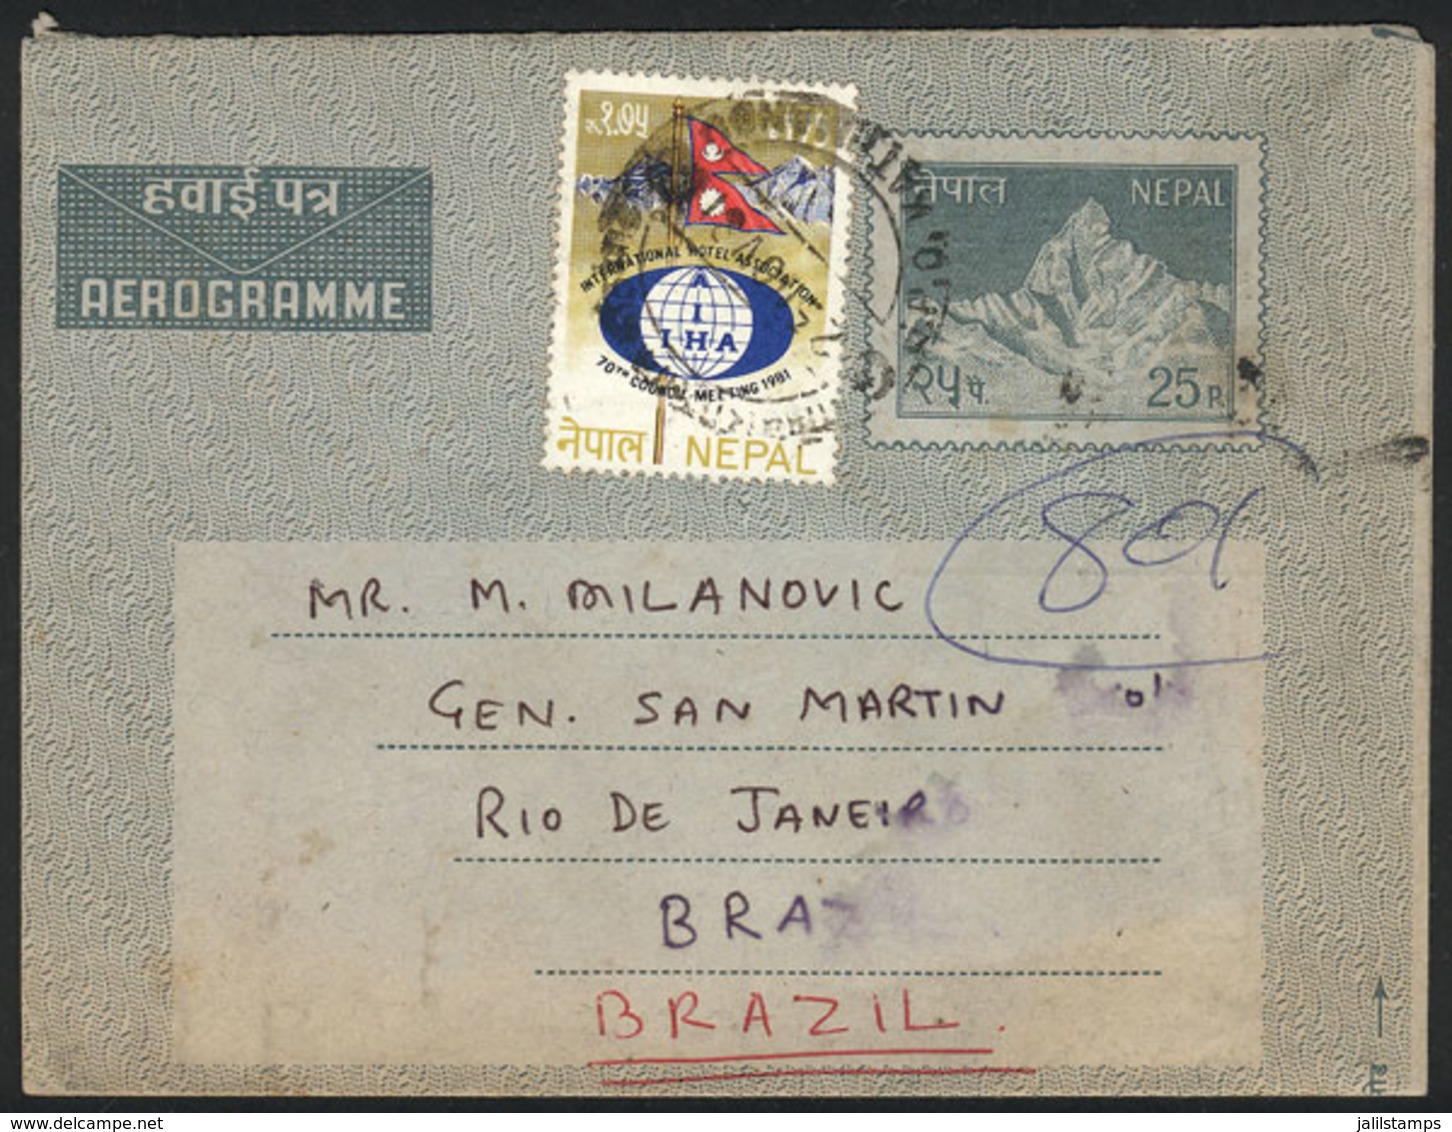 NEPAL: Aerogram With Additional Postage On Front And Back Sent From Kathmandu To Brazil On 25/NO/1981, Fine Quality, Rar - Népal